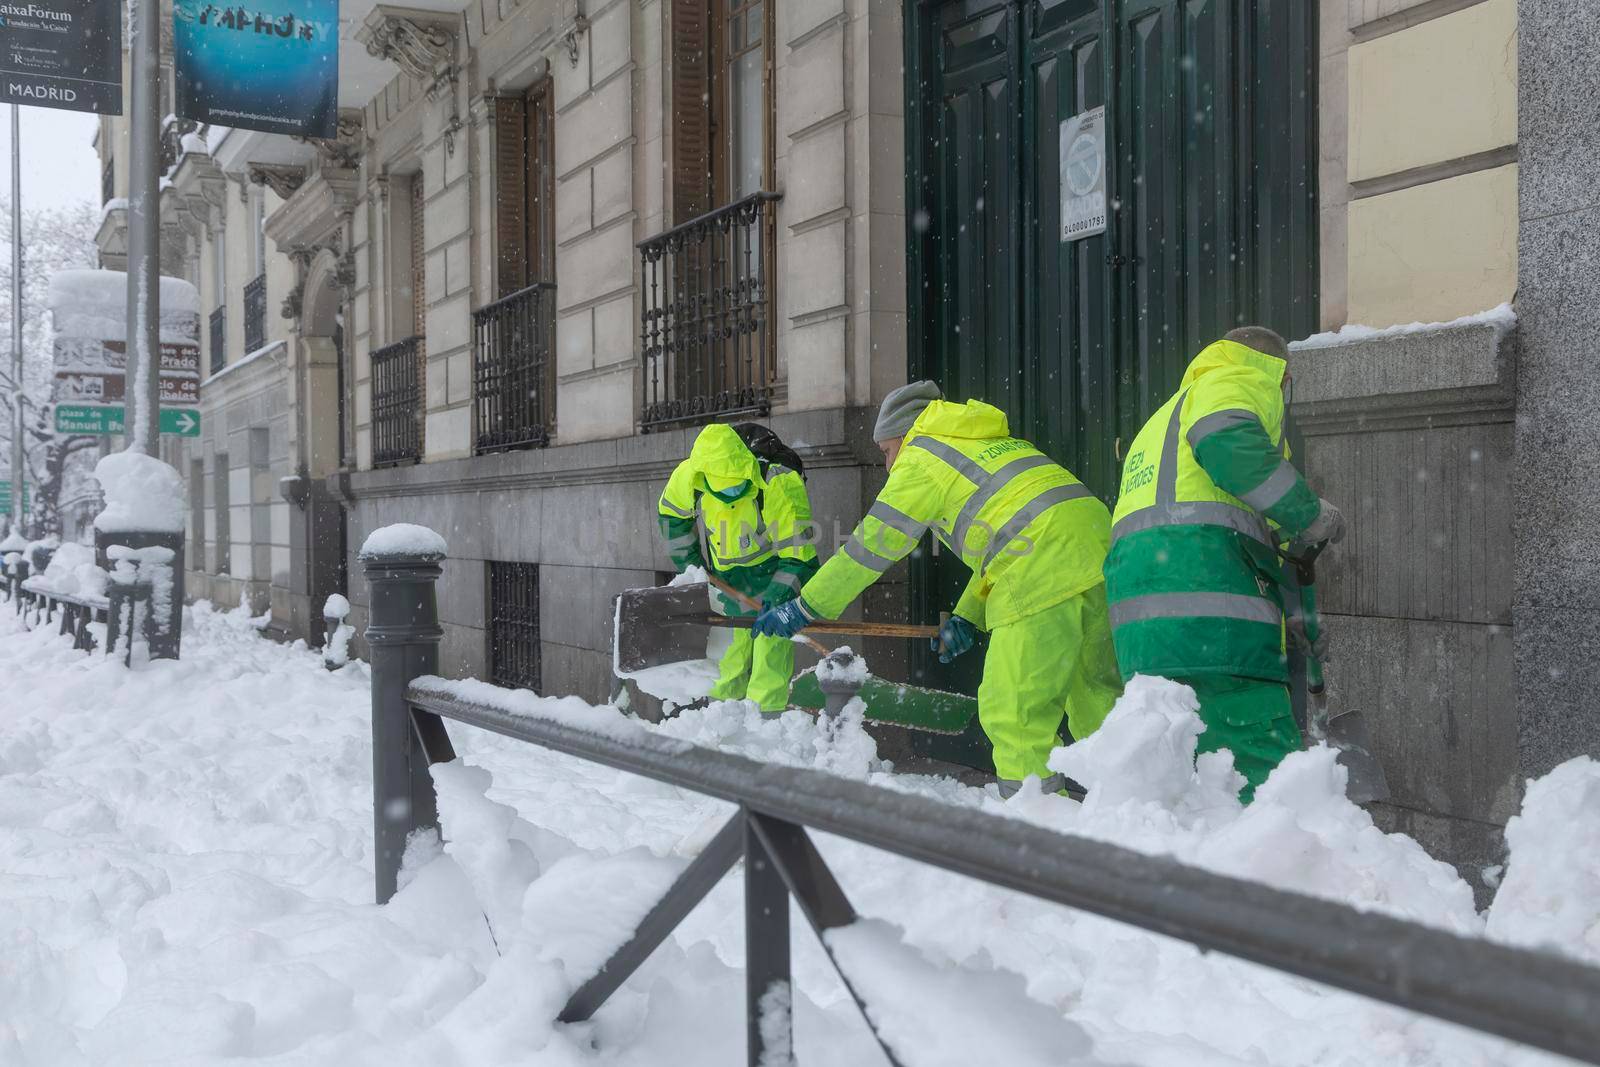 Madrid, Spain - January 09, 2021: A group of workers from the municipal cleaning service work cleaning the sidewalks with shovels and salt, due to the filomena polar cold front.